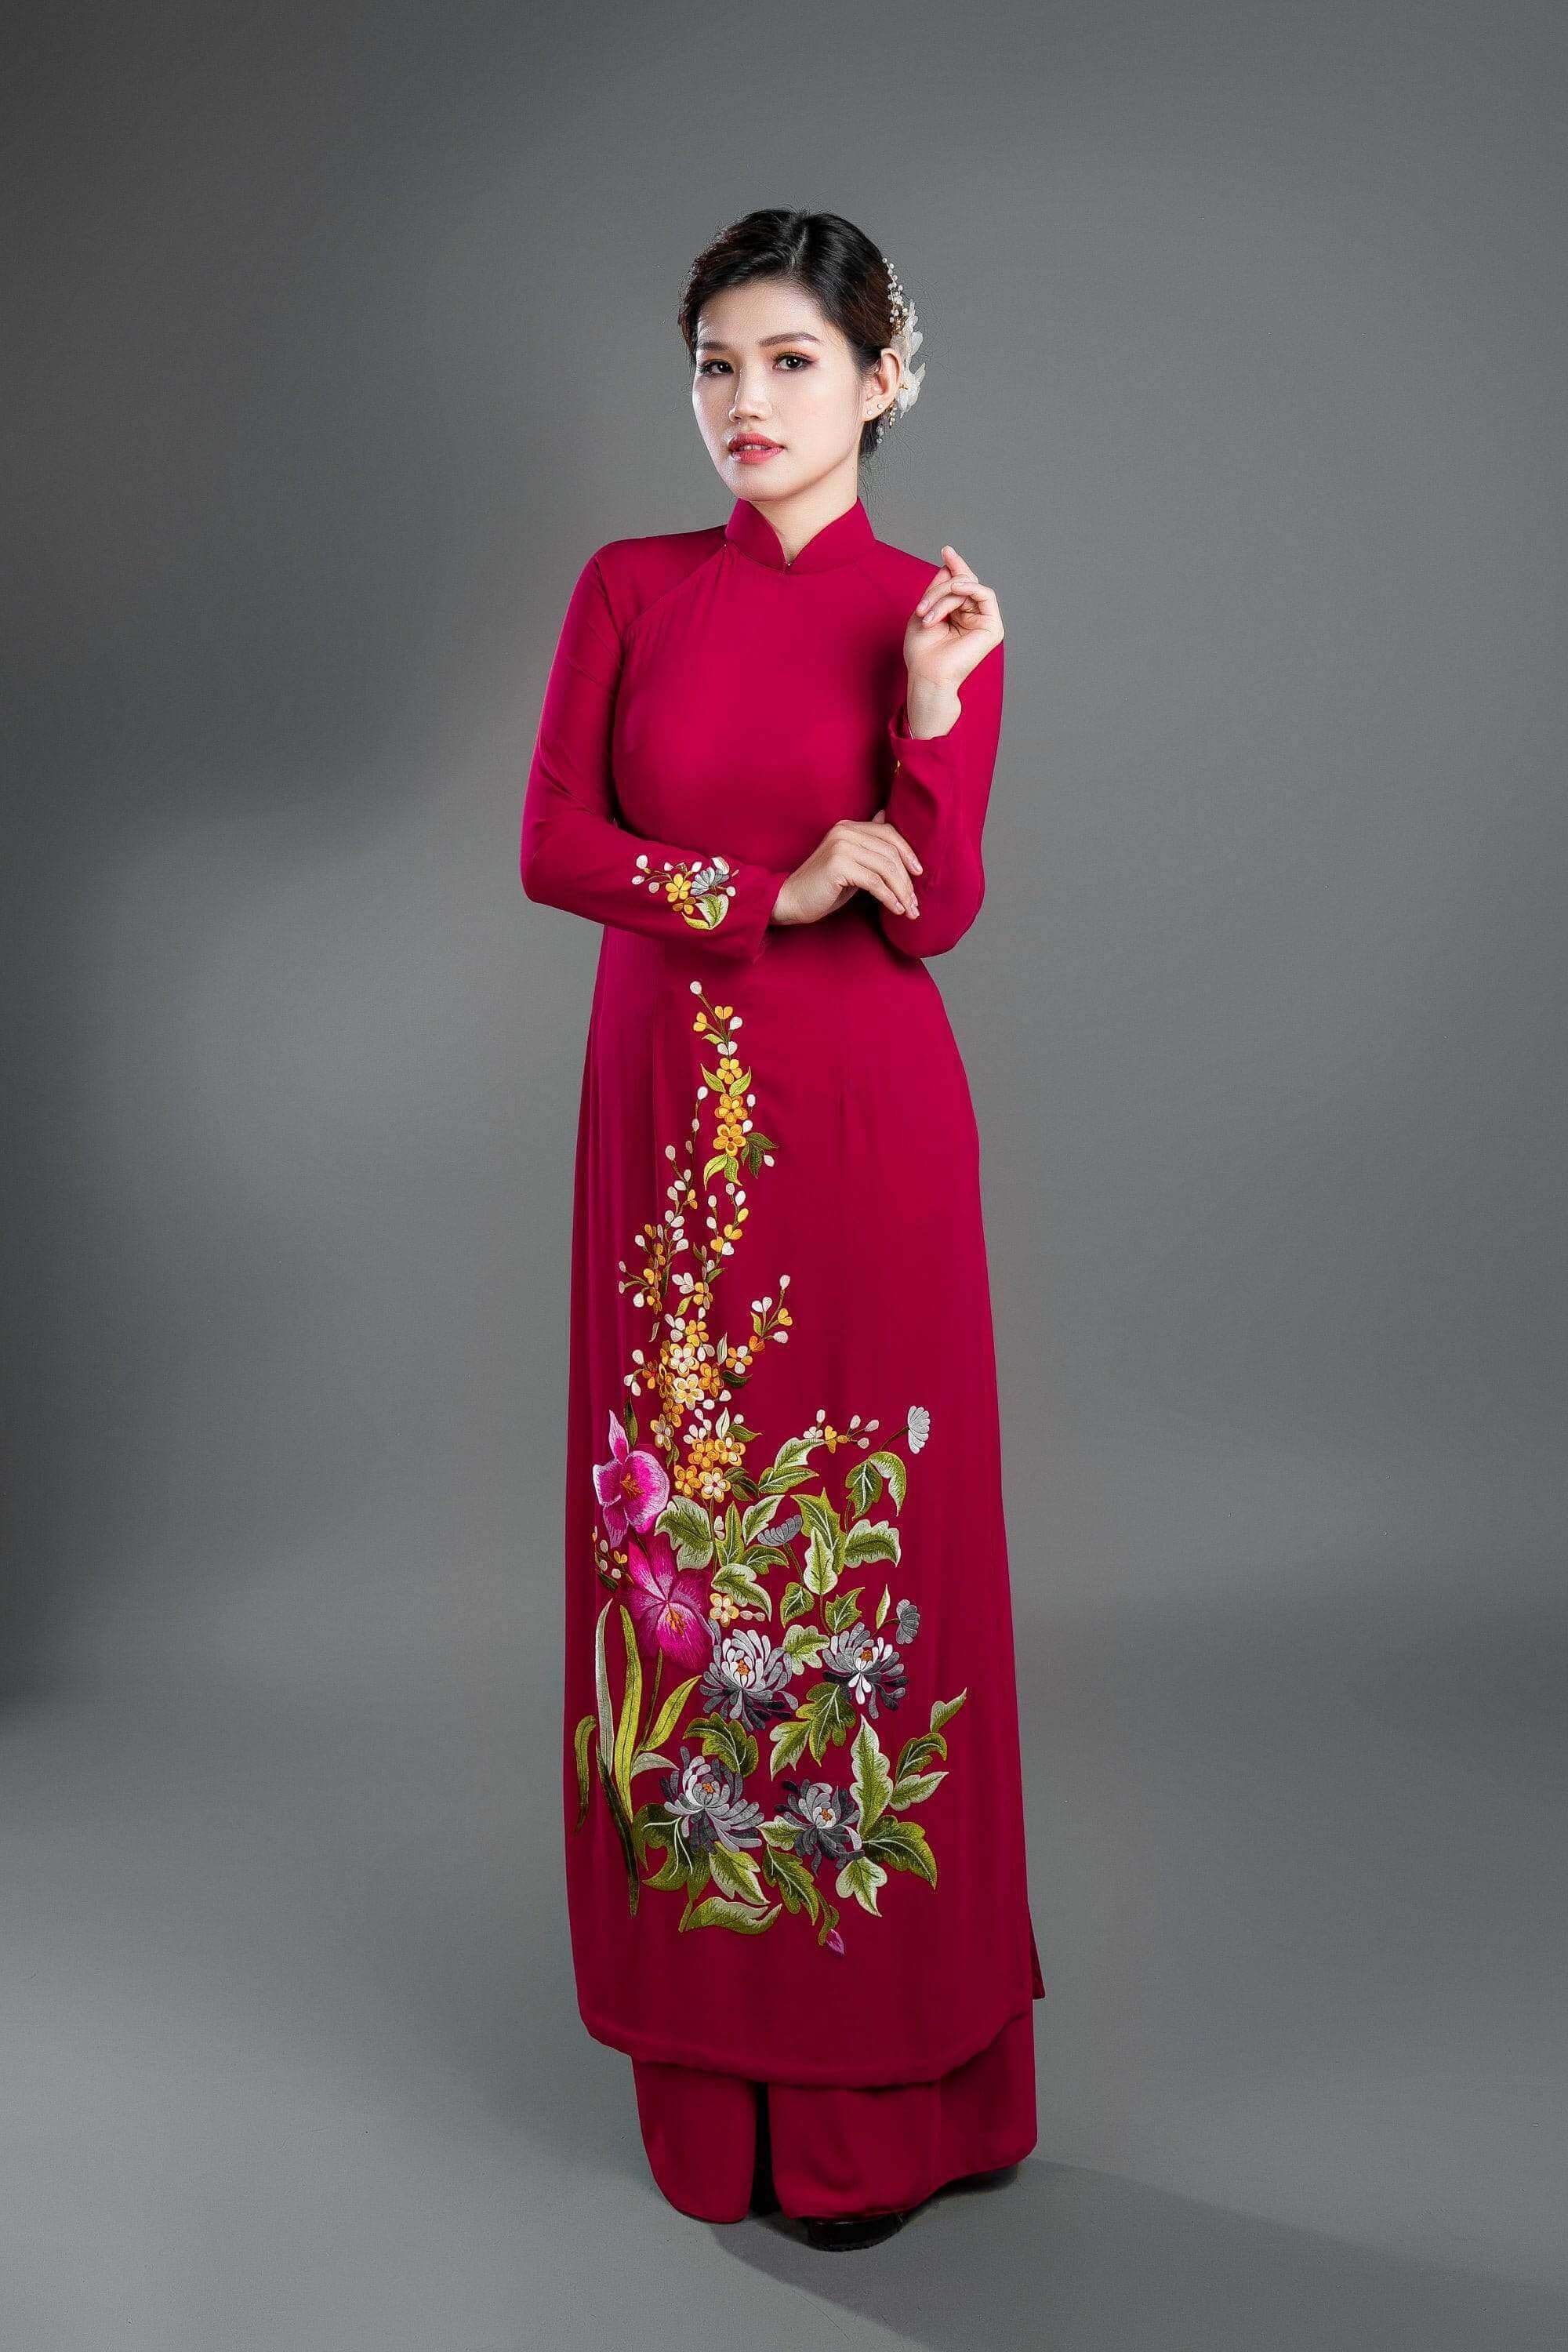 What do you know about Vietnamese traditional costumes?